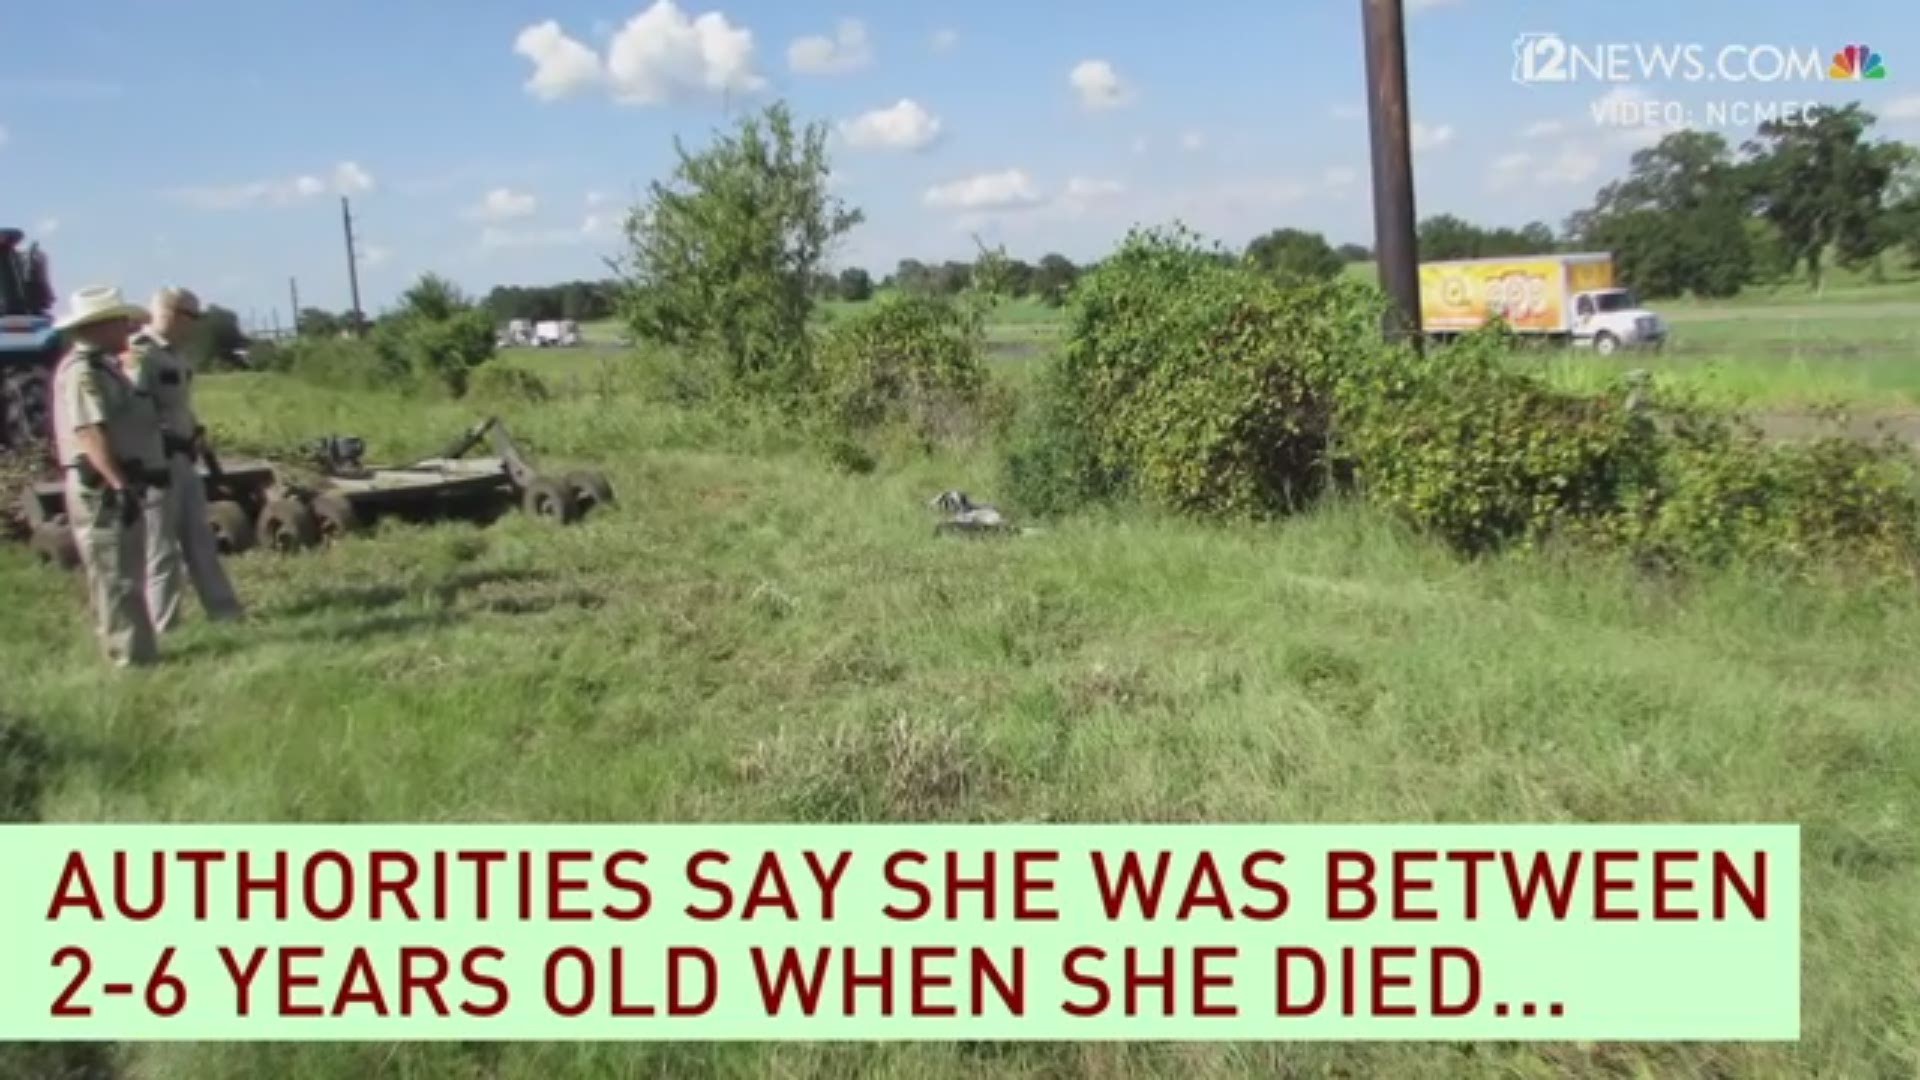 The unidentified girl's skeletal remains were found in Madisonville, Texas, on Sept. 17, 2016.